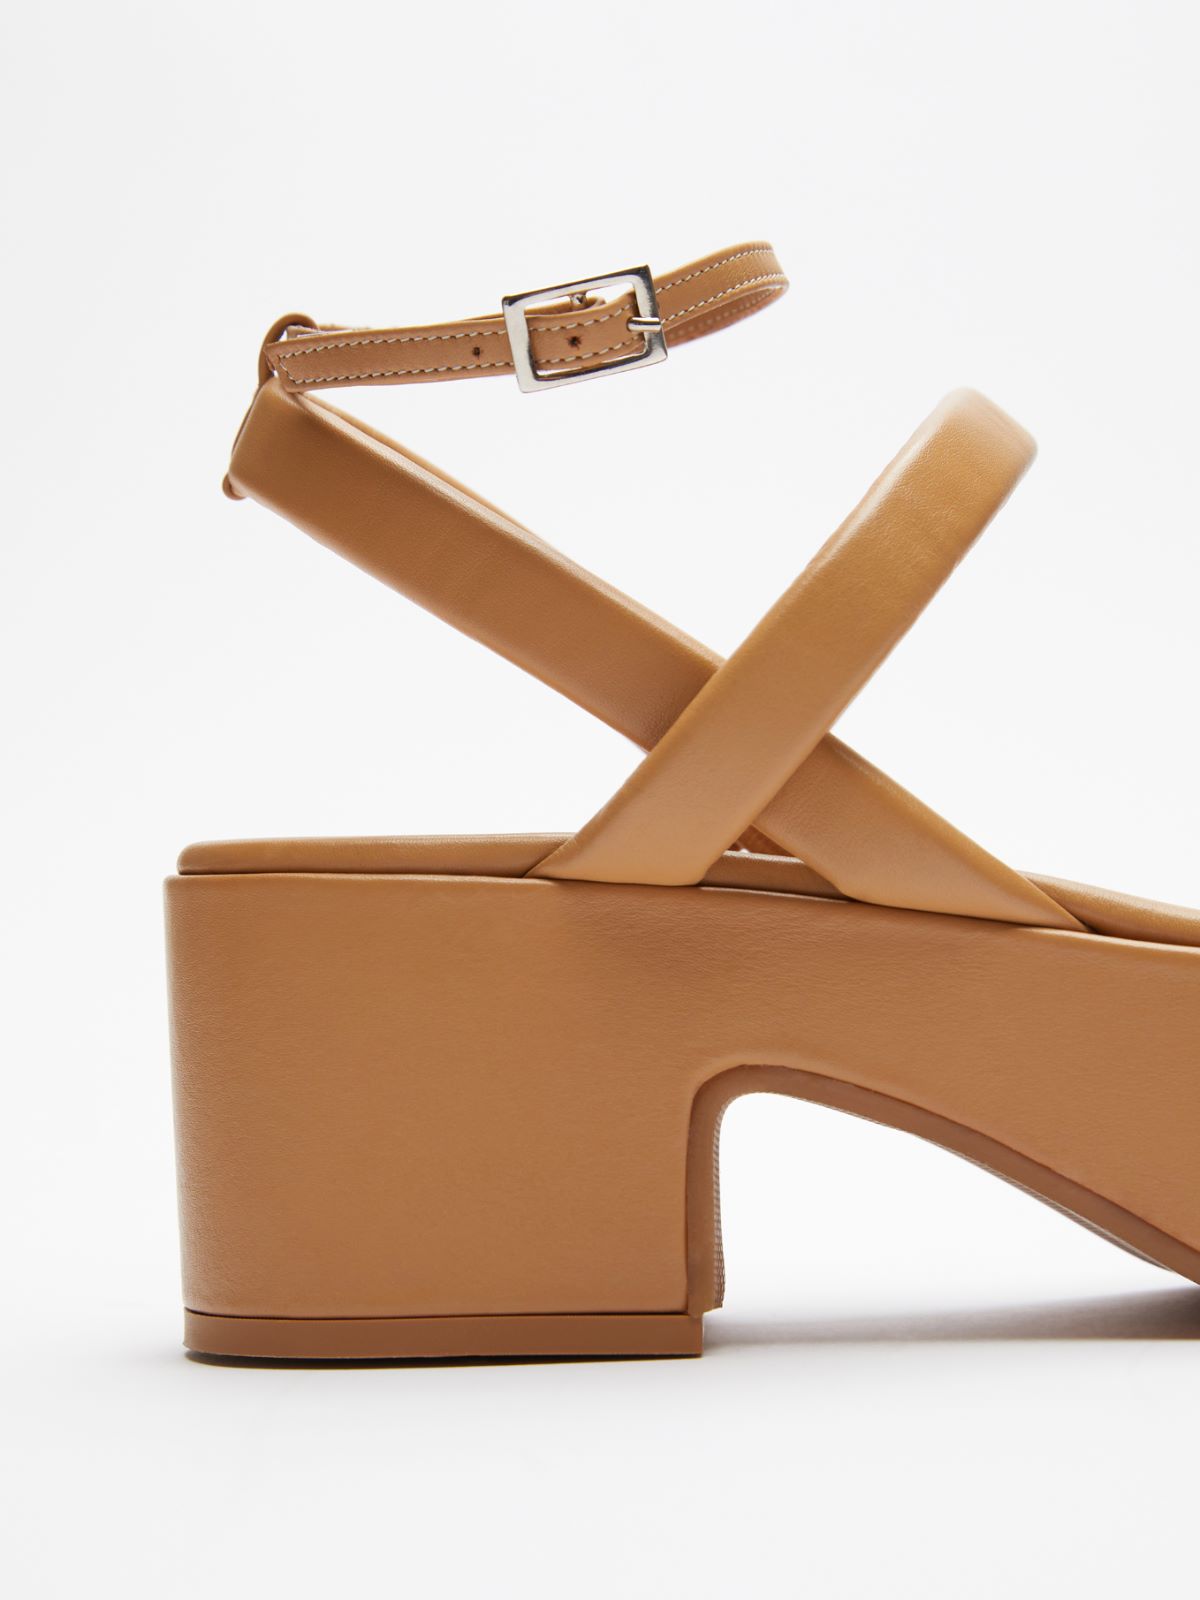 Sandals in nappa leather - NATURAL - Weekend Max Mara - 4